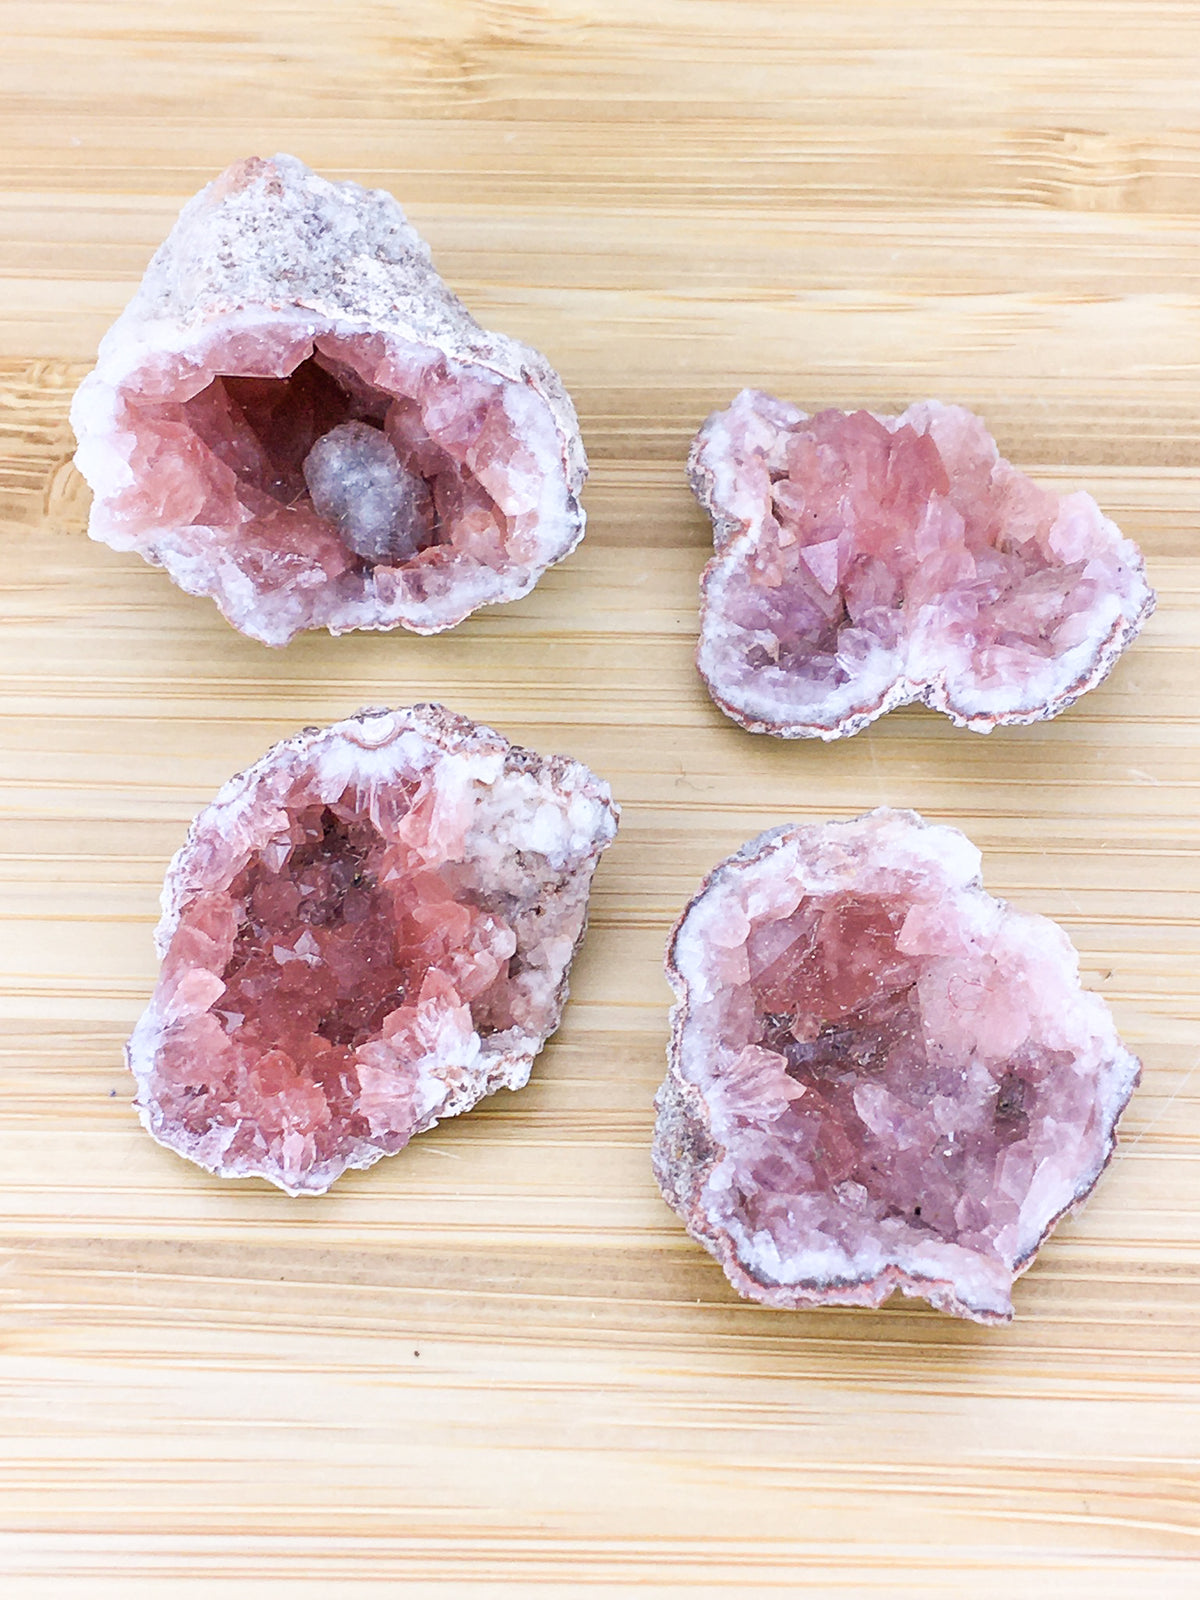 four geodes filled with pink amethyst crystals